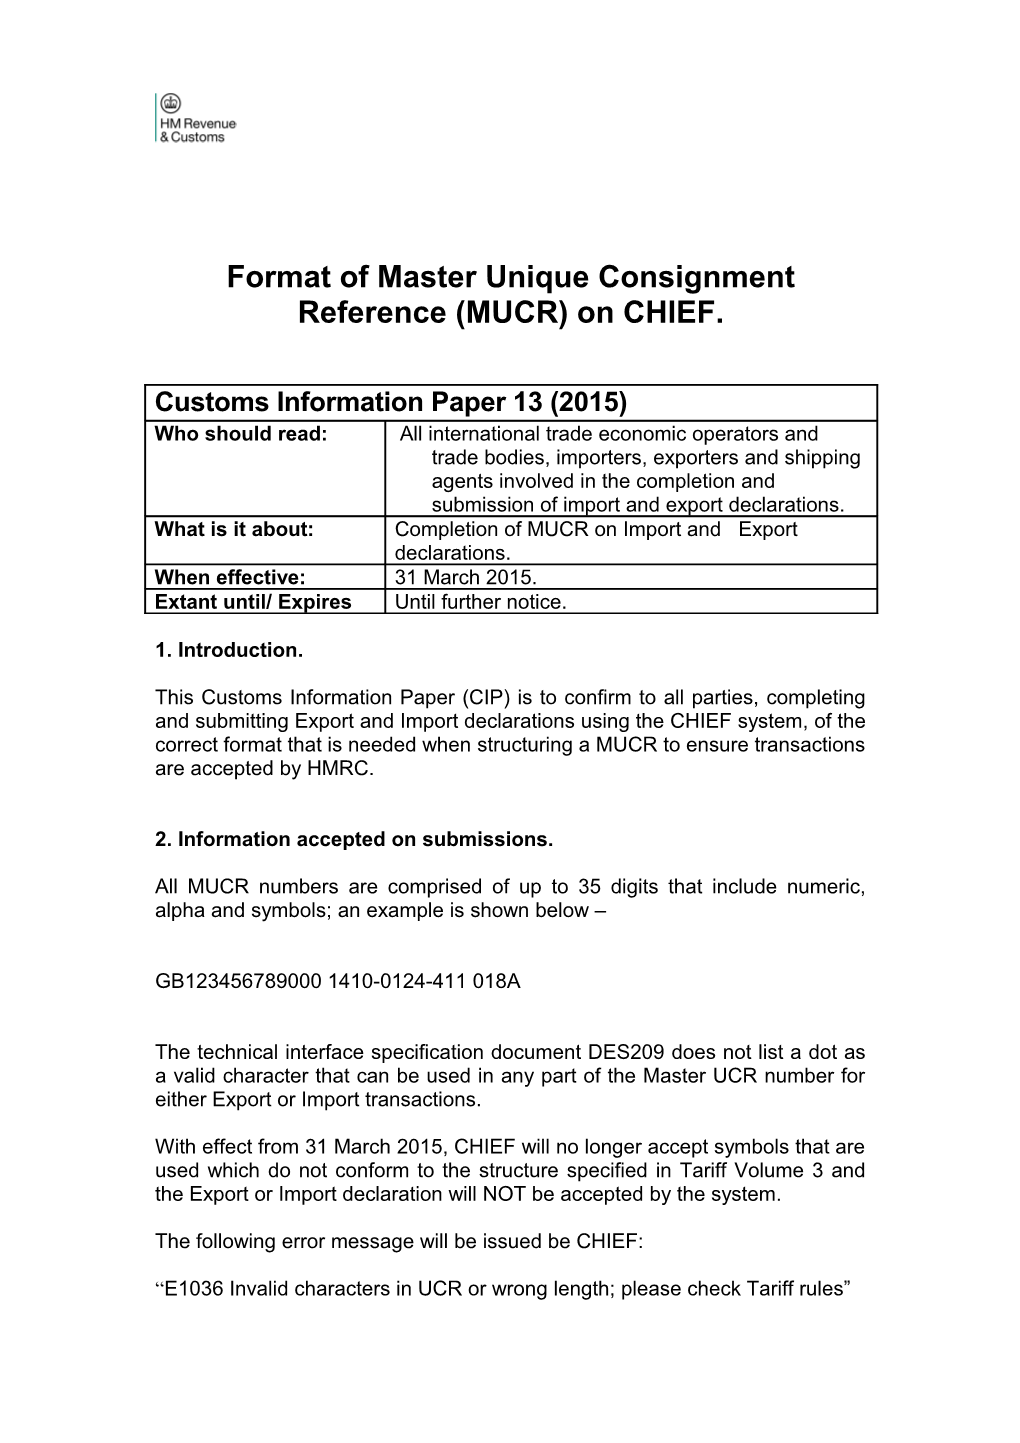 Format of Master Unique Consignment Reference (MUCR) on CHIEF